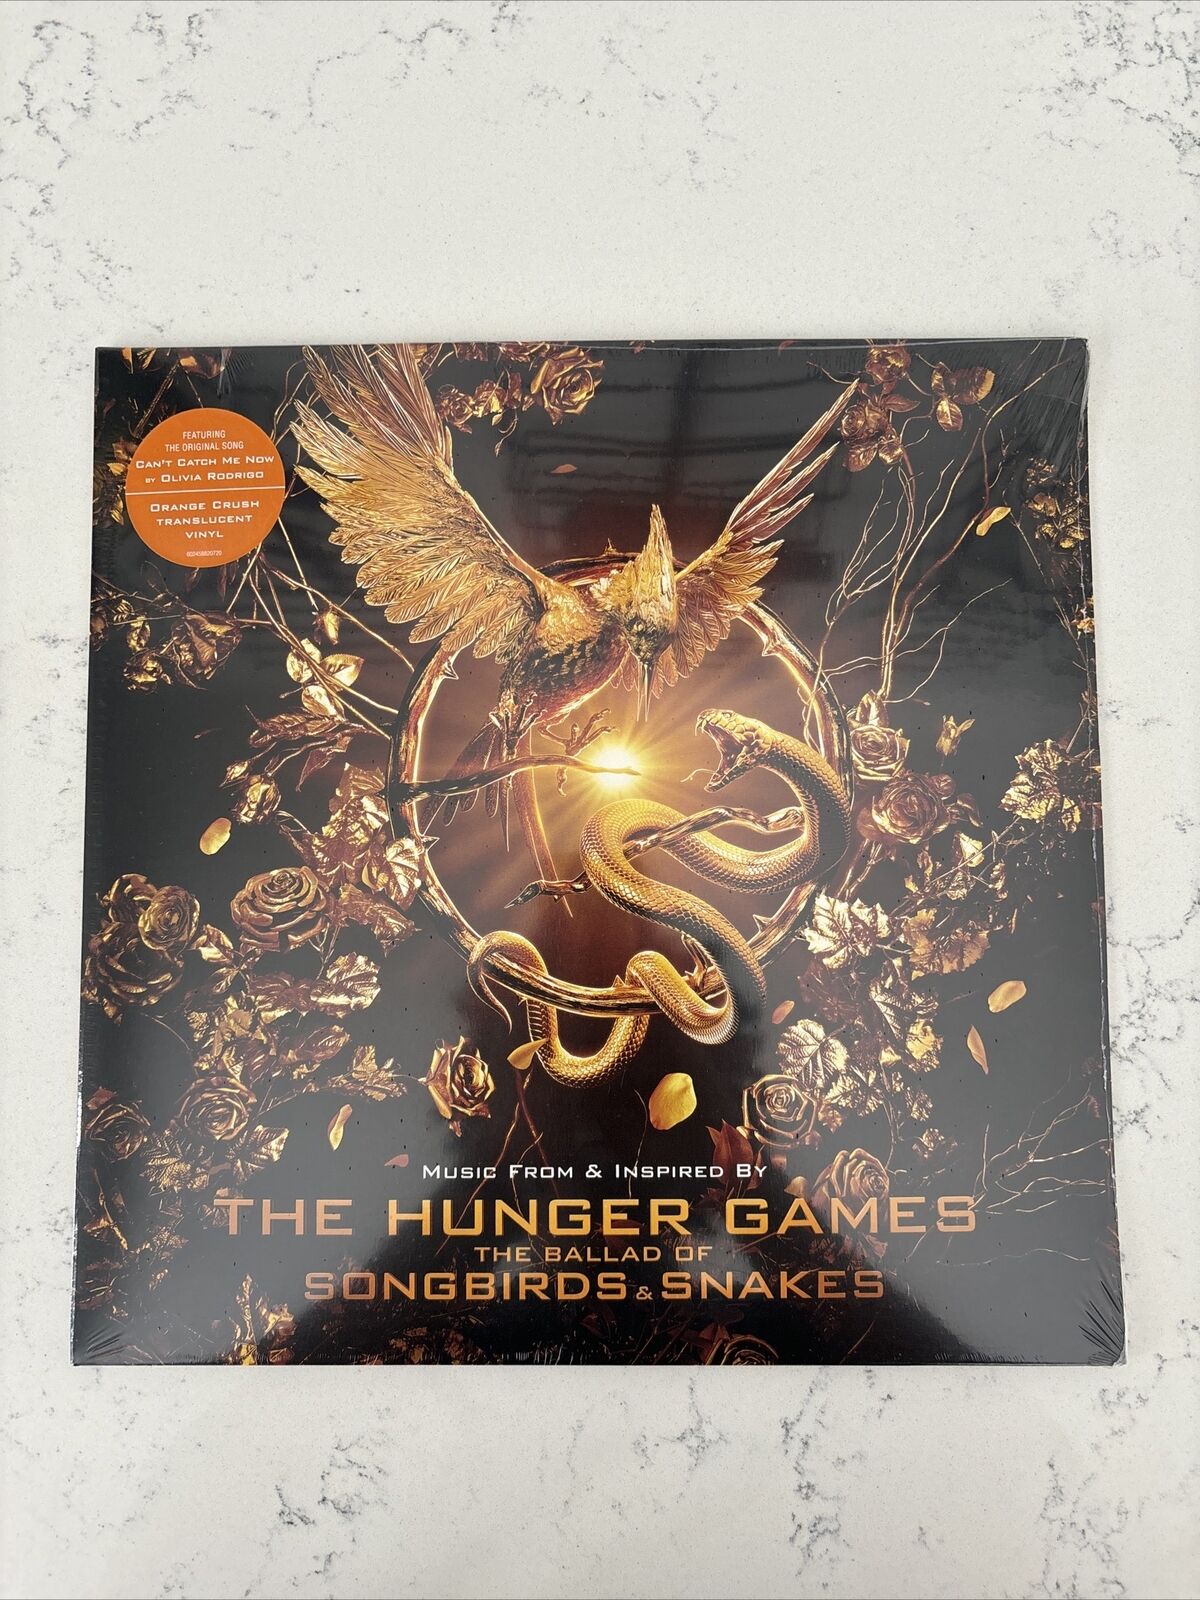 RARE VARIOUS ARTISTS HUNGER GAMES: THE BALLAD OF SONGBIRDS & SNAKES [ORANGE LP]